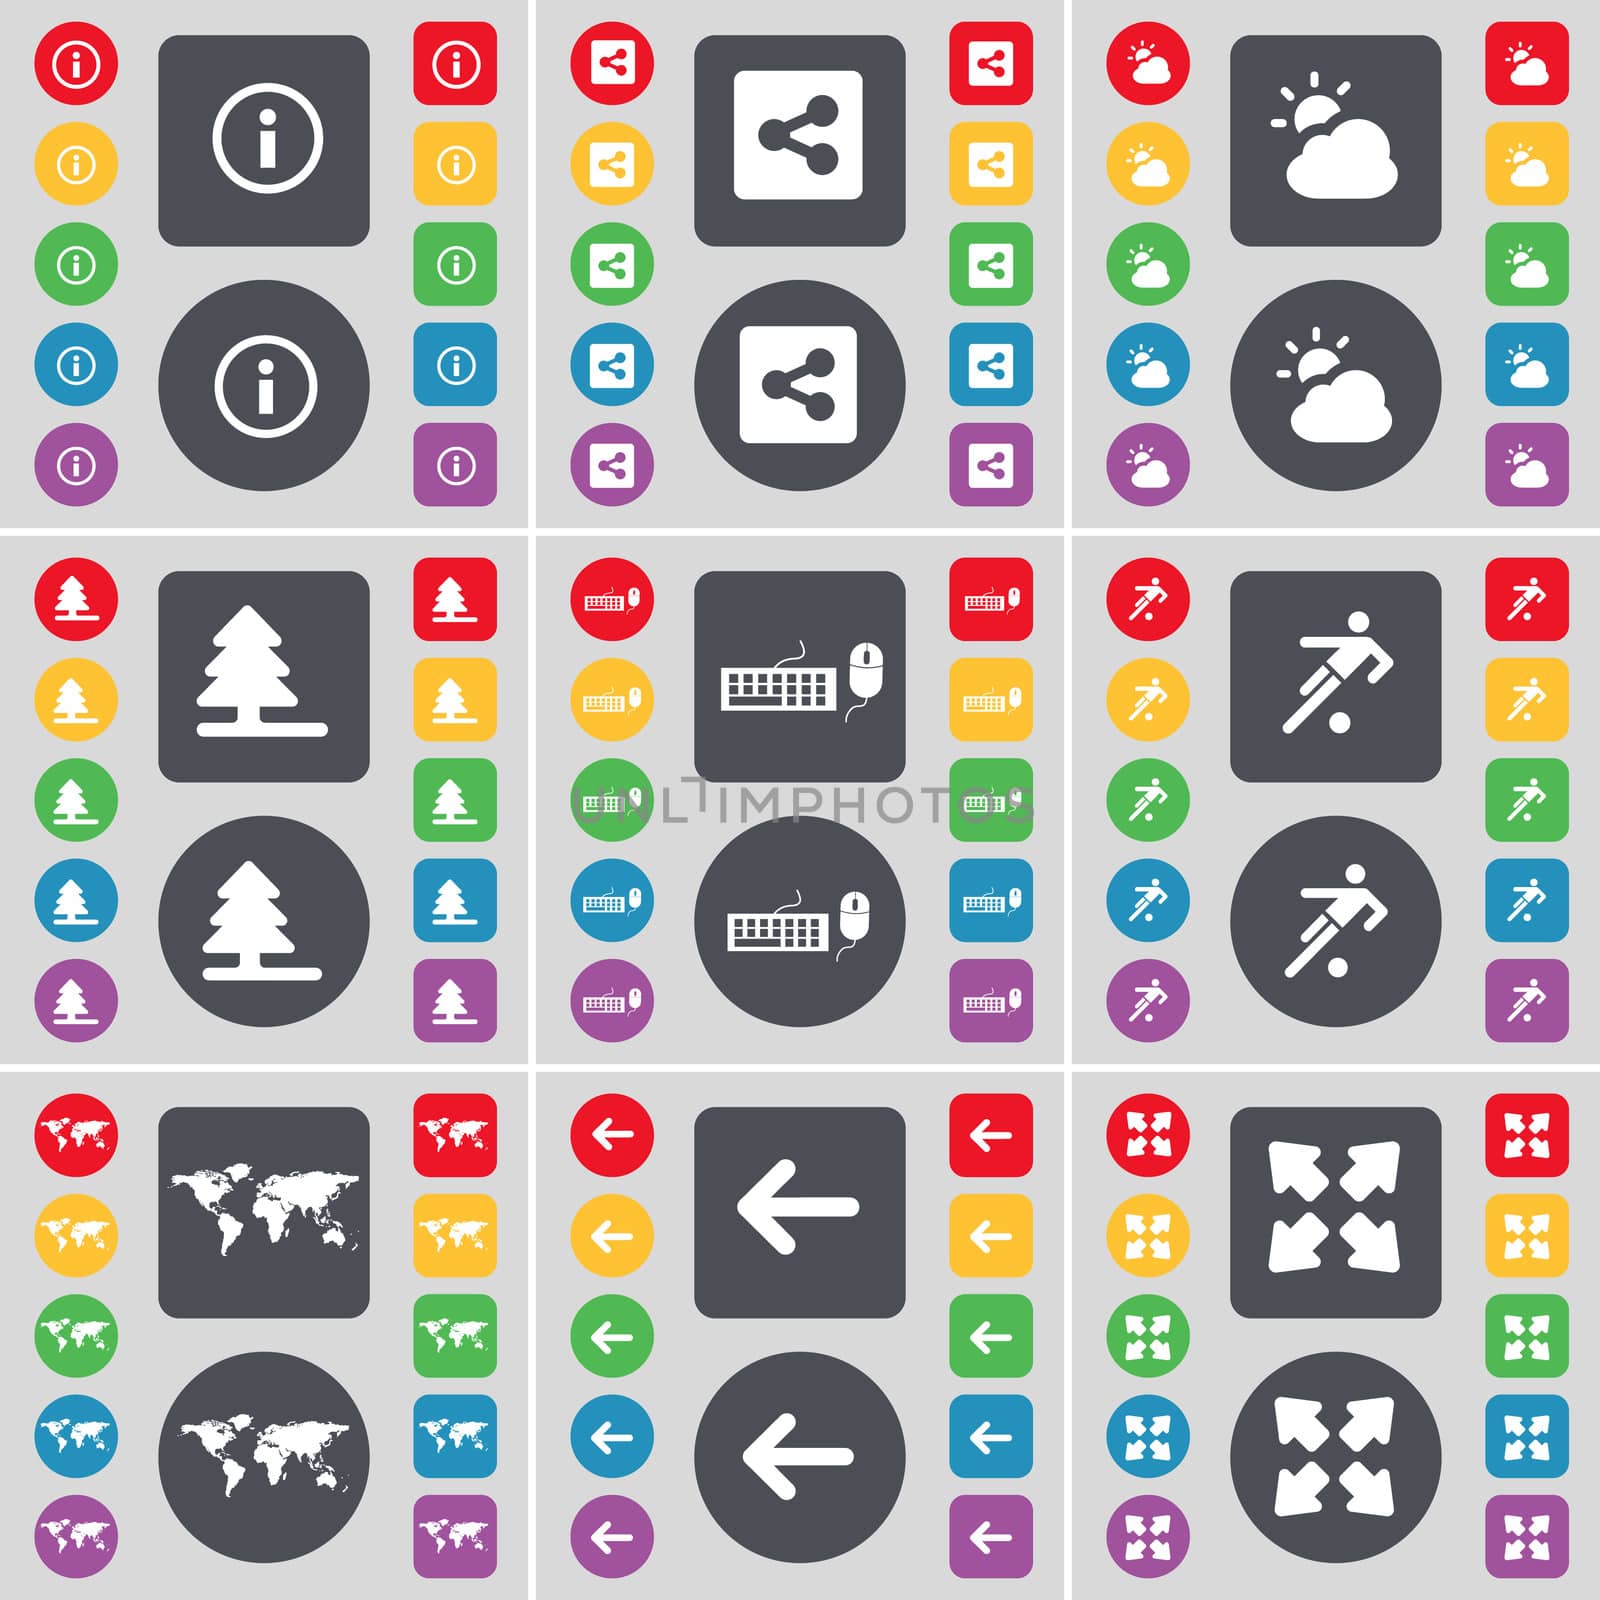 Information mark, Share, Cloud, Firtree, Keyboard, Football, Globe, Arrow left, Full screen icon symbol. A large set of flat, colored buttons for your design.  by serhii_lohvyniuk